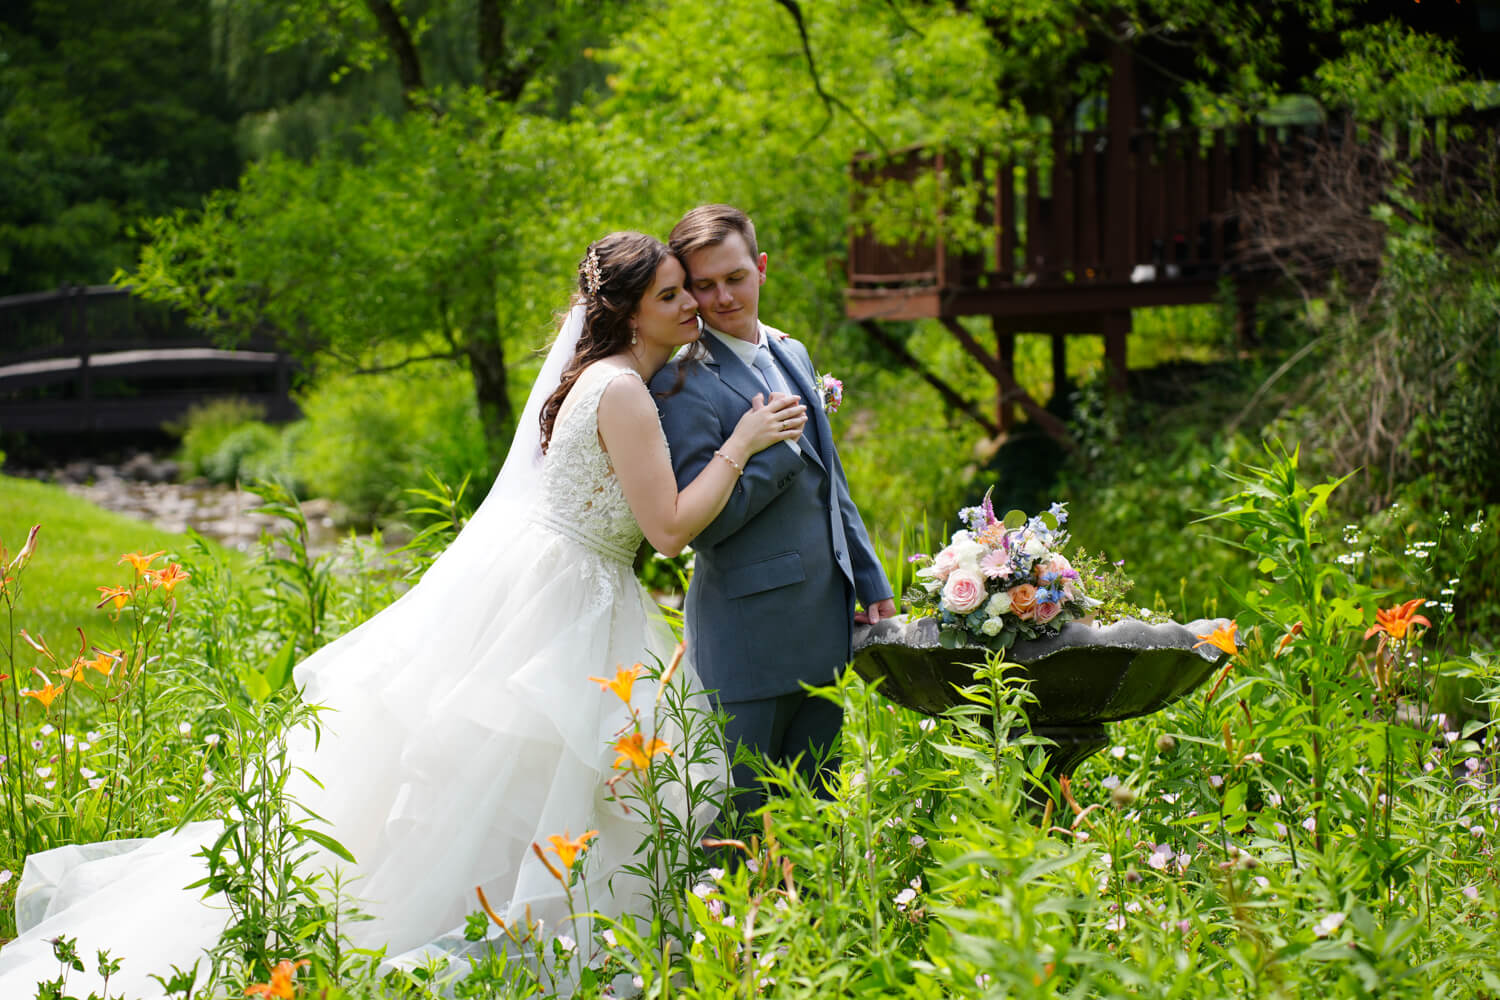 Wedding portrait in the summer gardens by the creek at Honeysuckle Hills in Pigeon Forge